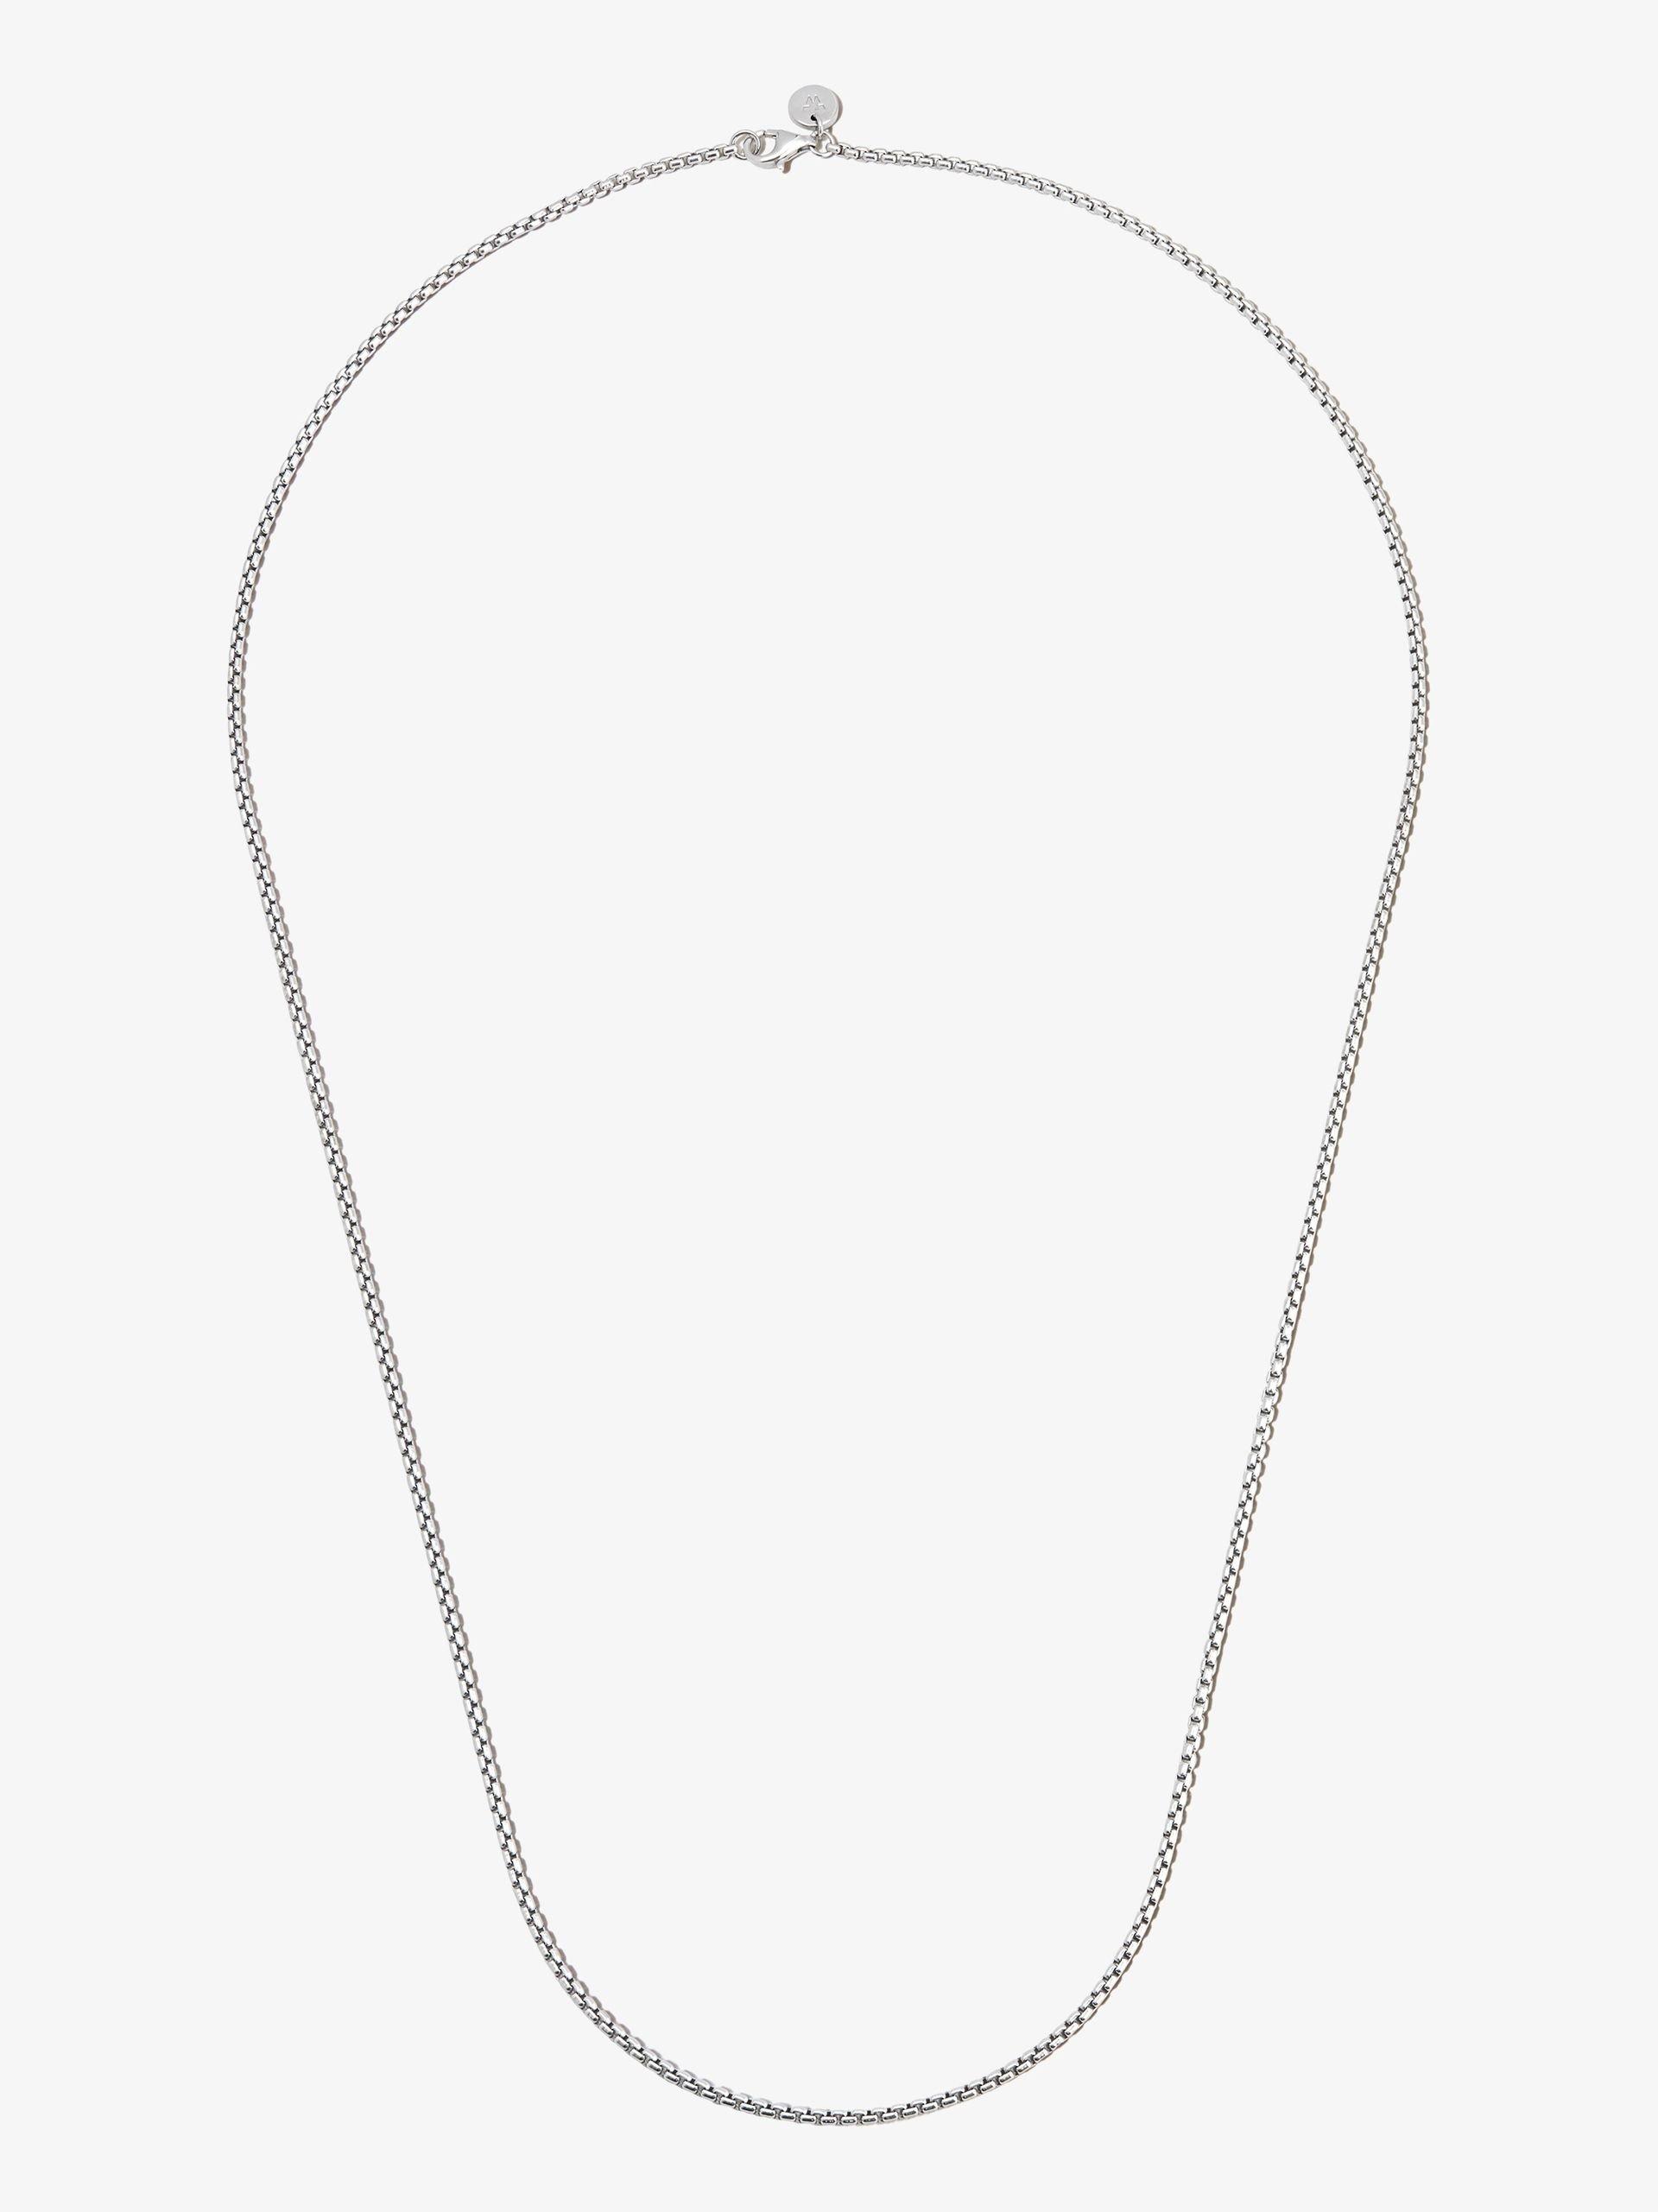 Mens Jewellery Necklaces for Men Tom Wood Venetian Chain Necklace in Silver Metallic 